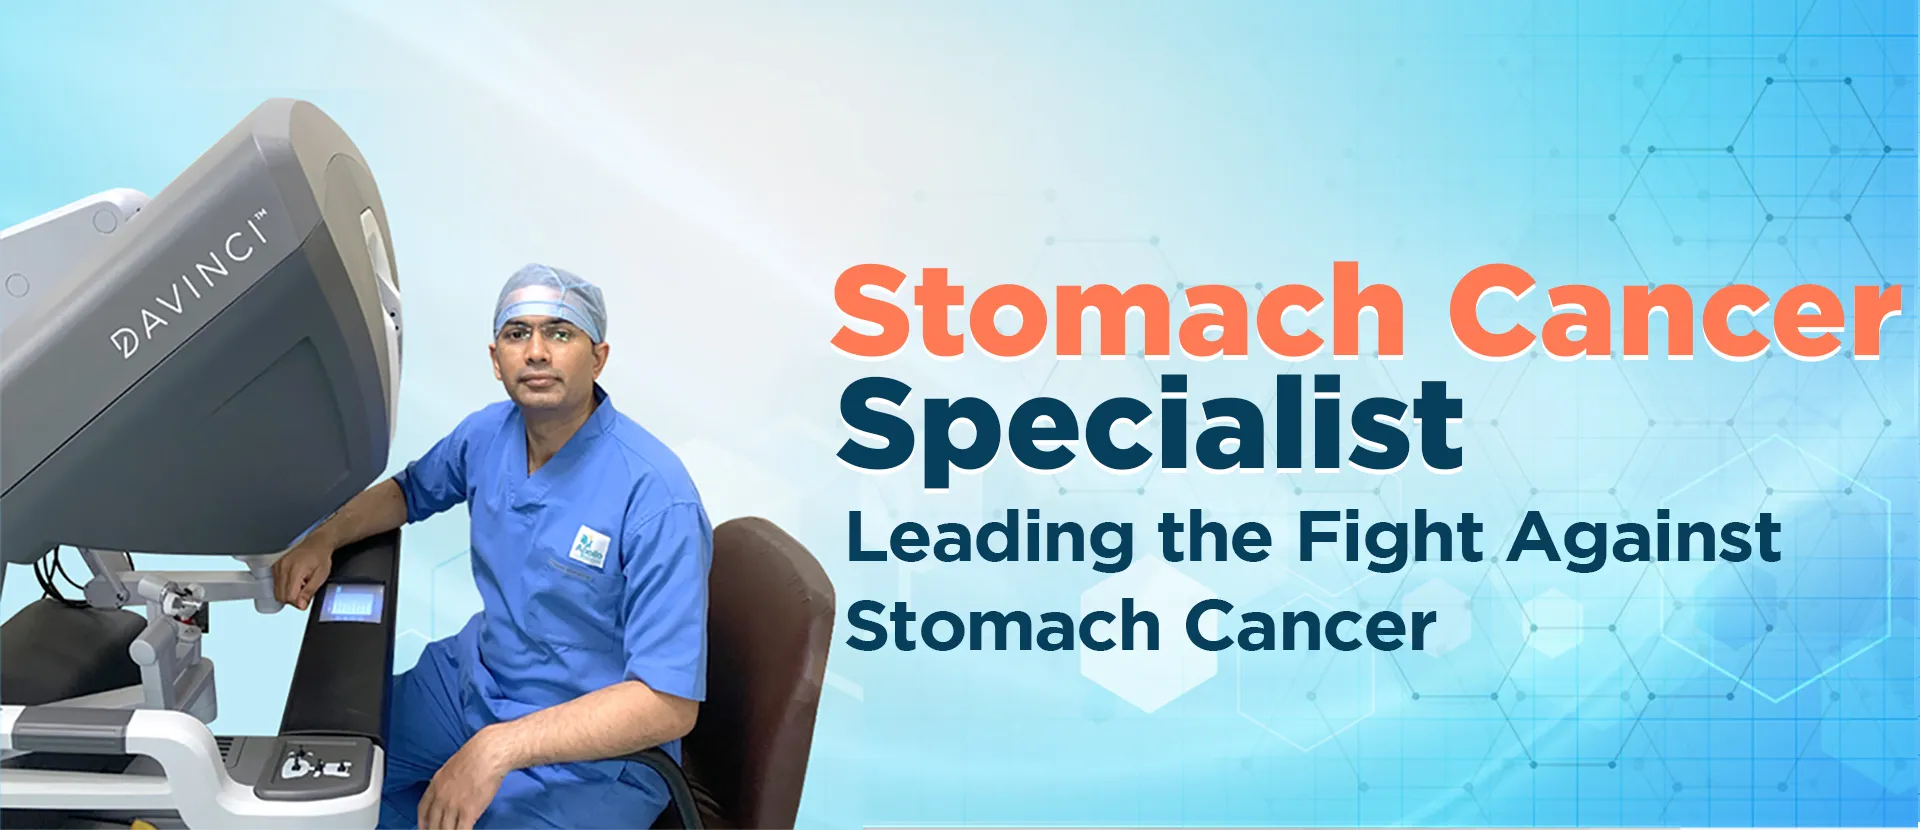 Best stomach cancer doctor and stomach cancer specialist in Ahmedabad, India